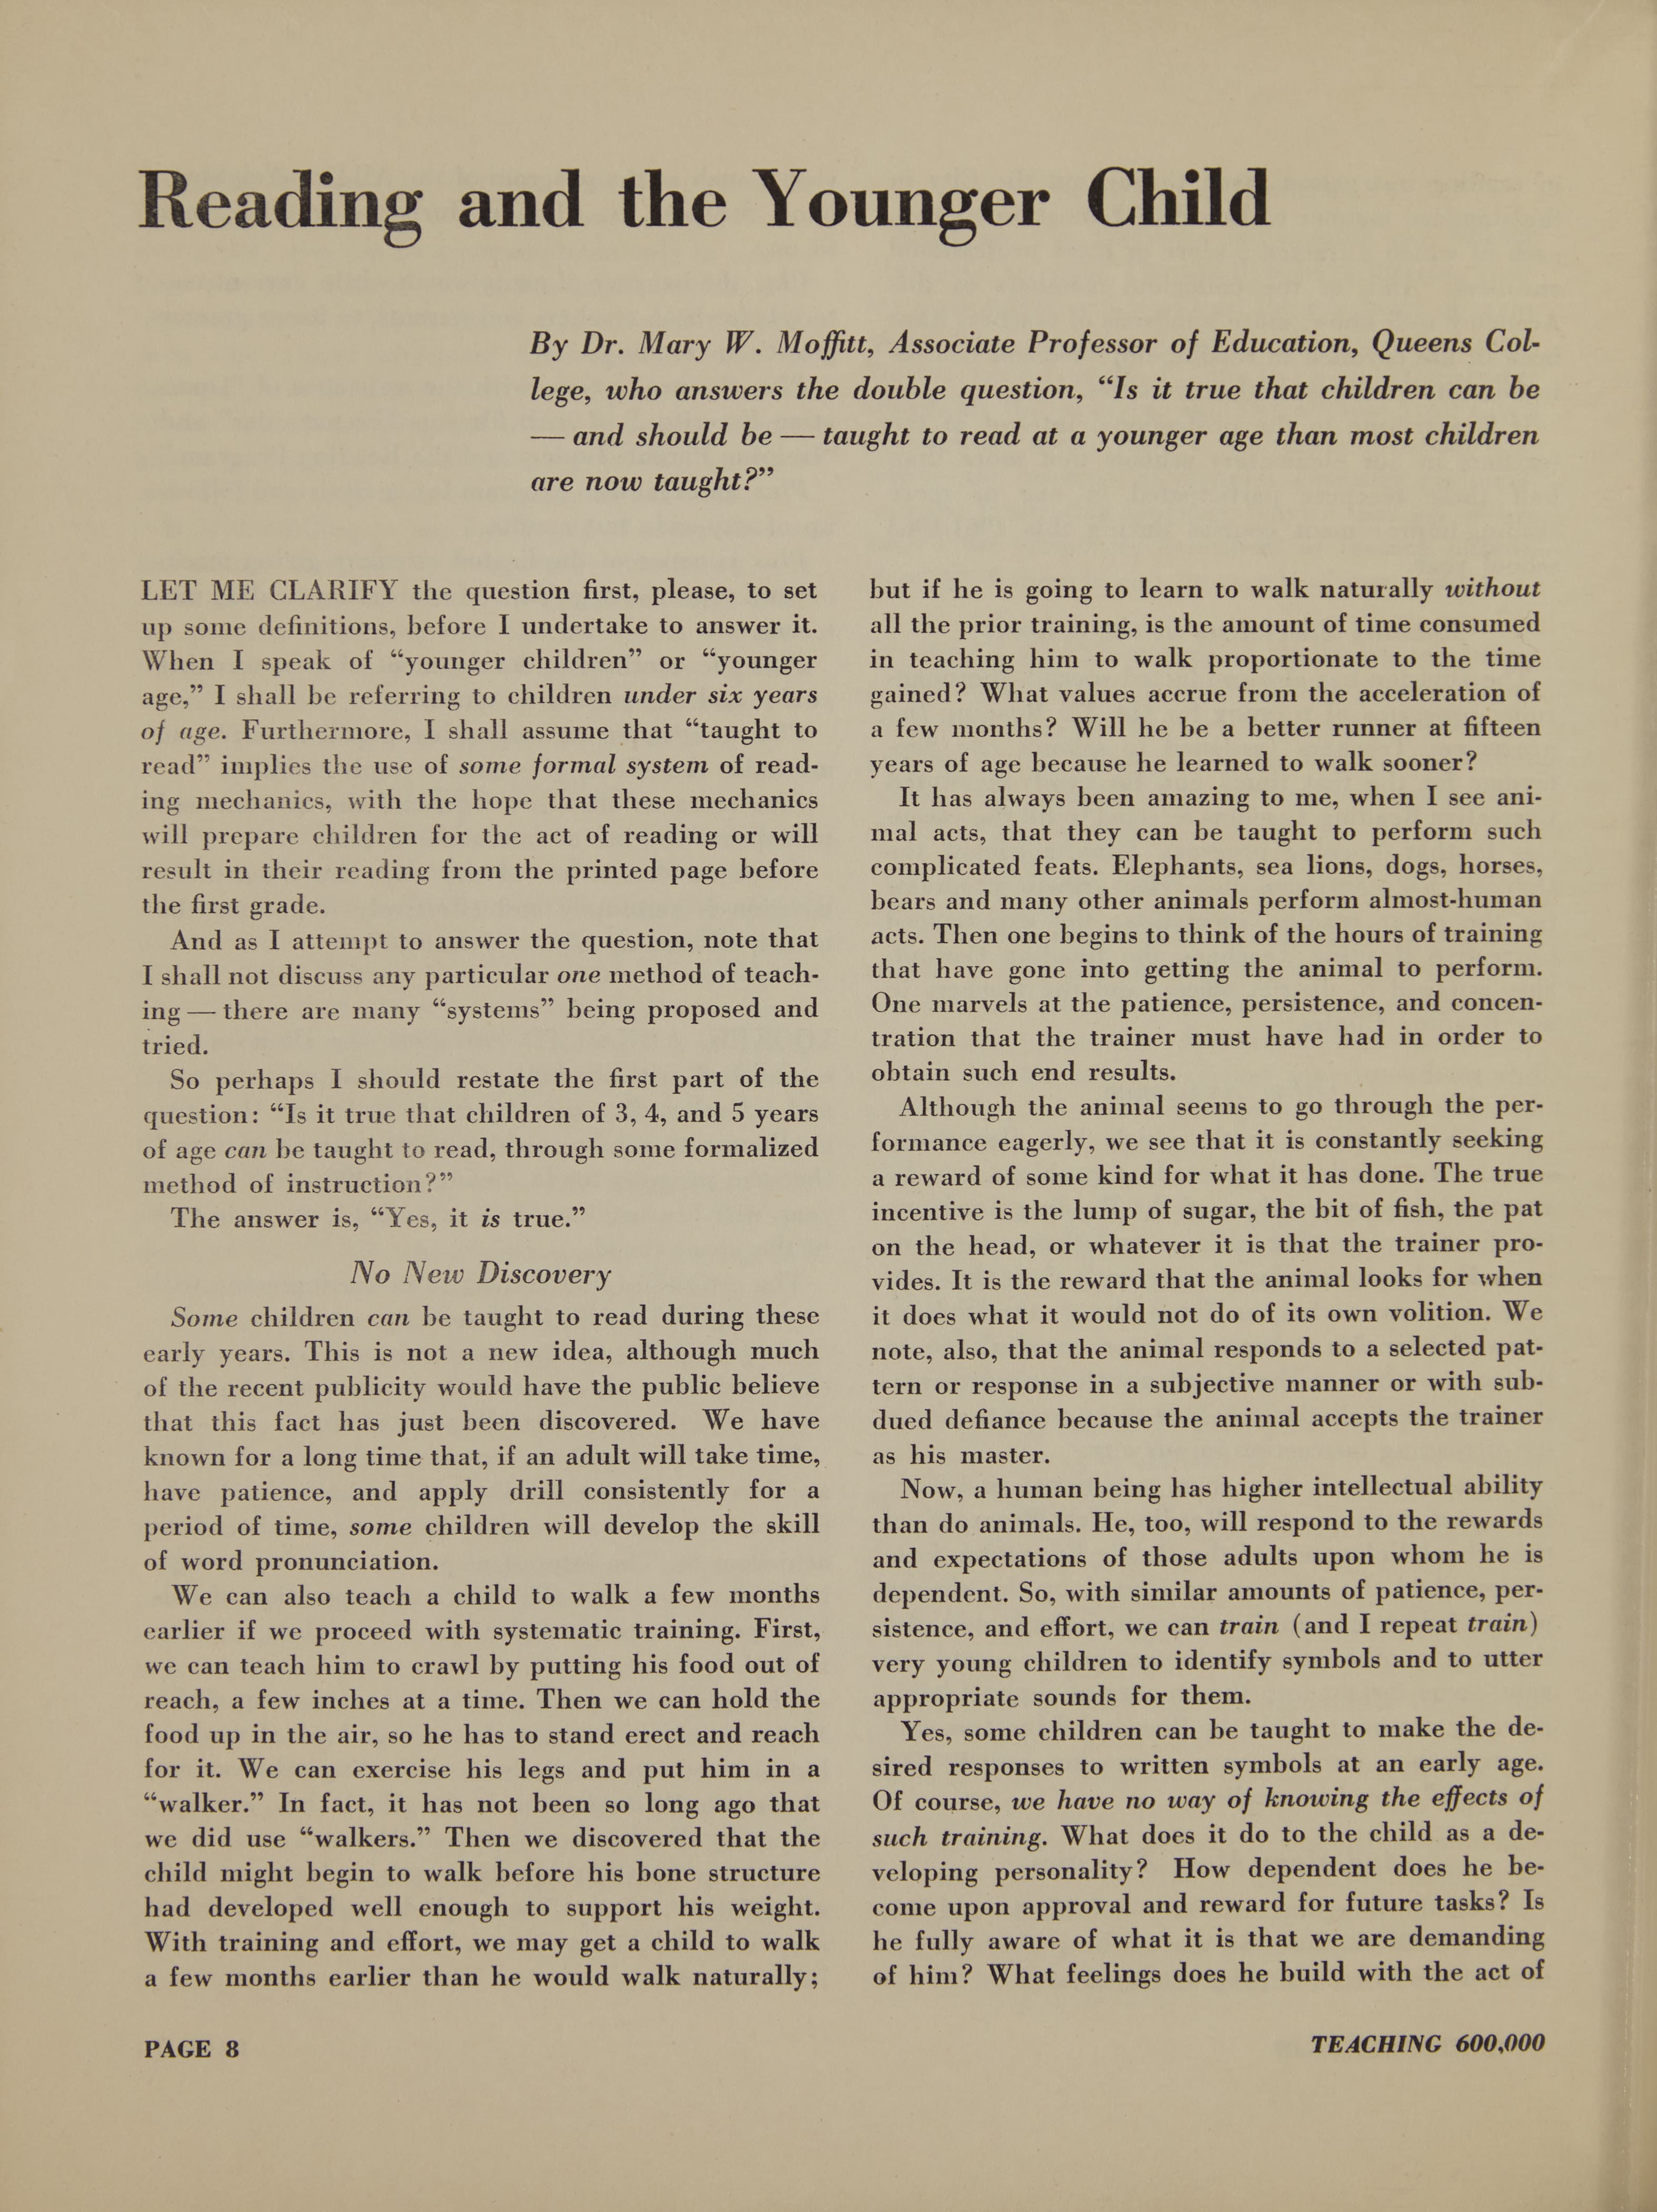 Single text page of the talk Reading and the Younger Child presented in 1962.